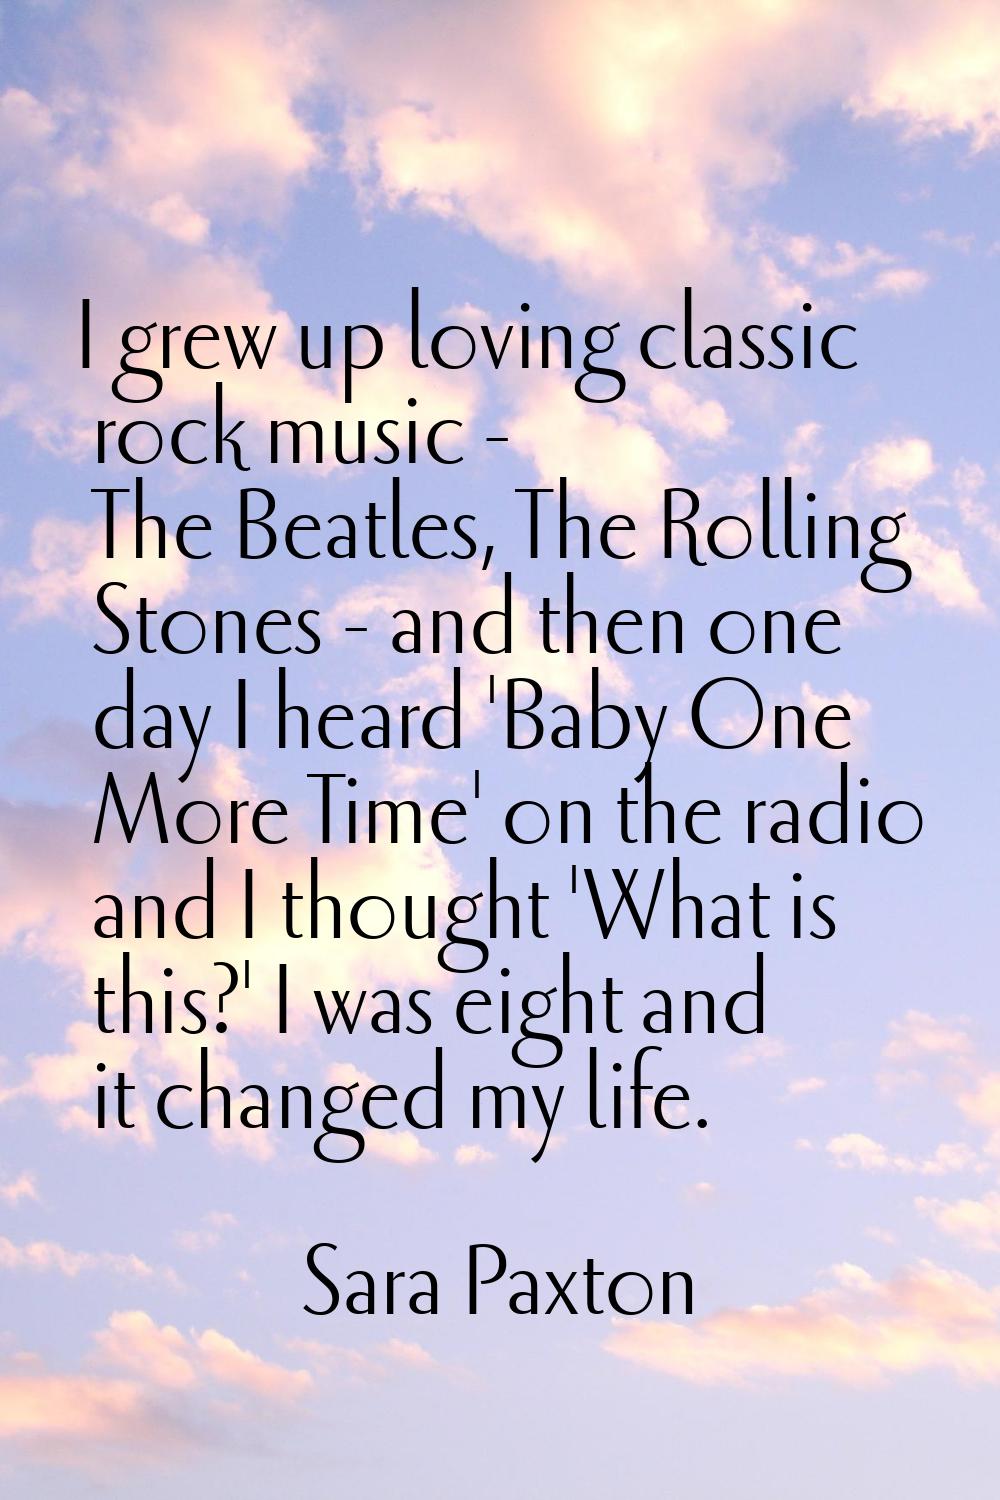 I grew up loving classic rock music - The Beatles, The Rolling Stones - and then one day I heard 'B